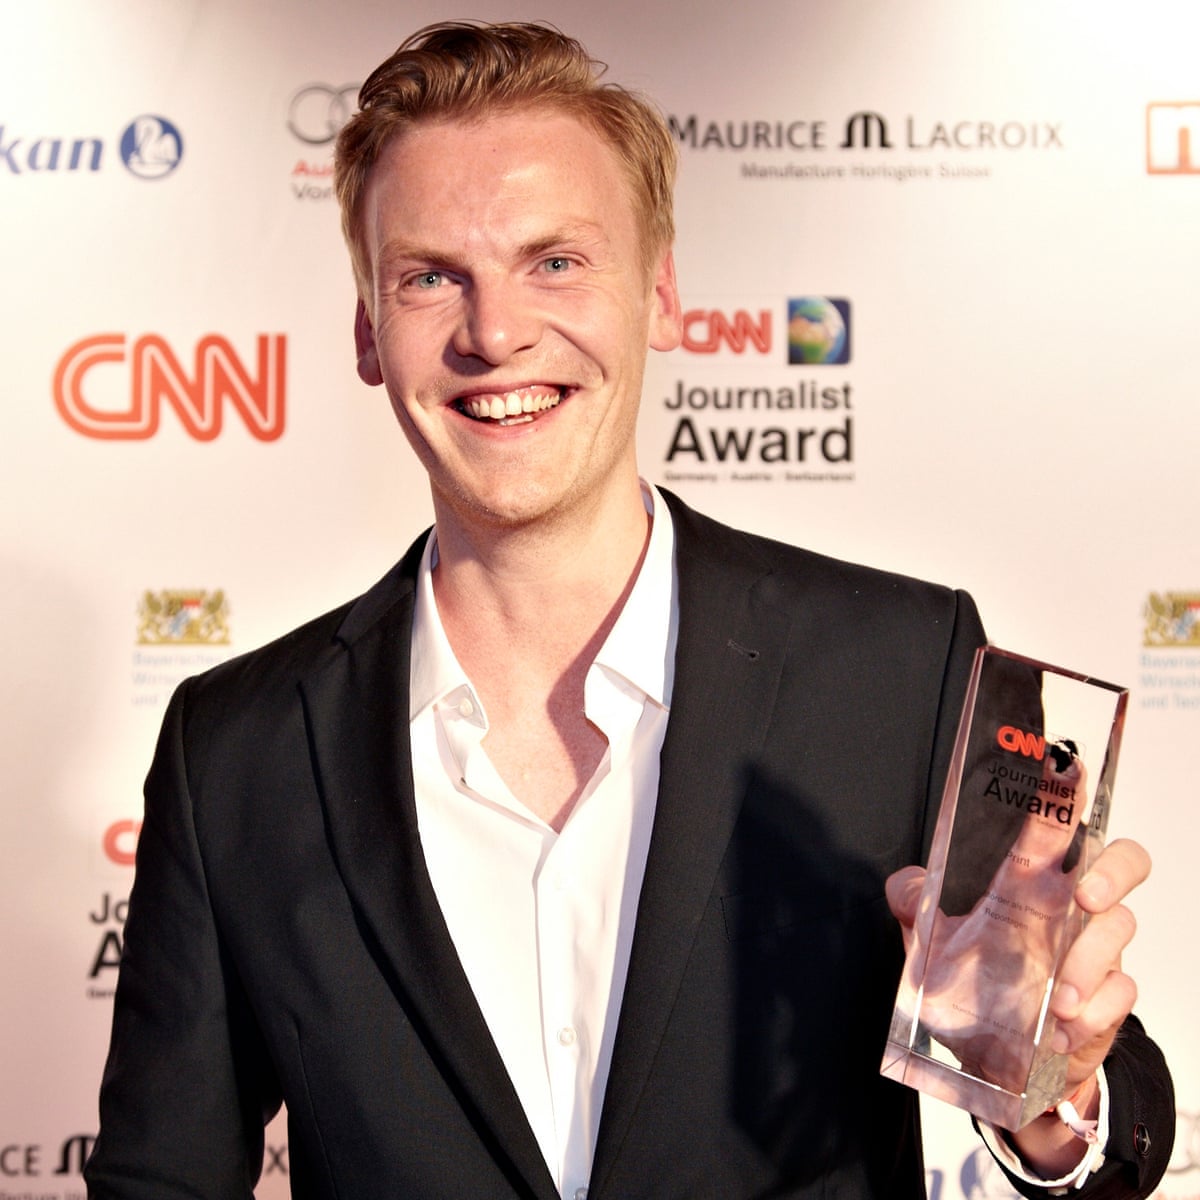 Der Spiegel takes the blame for scandal of reporter who faked stories, Germany